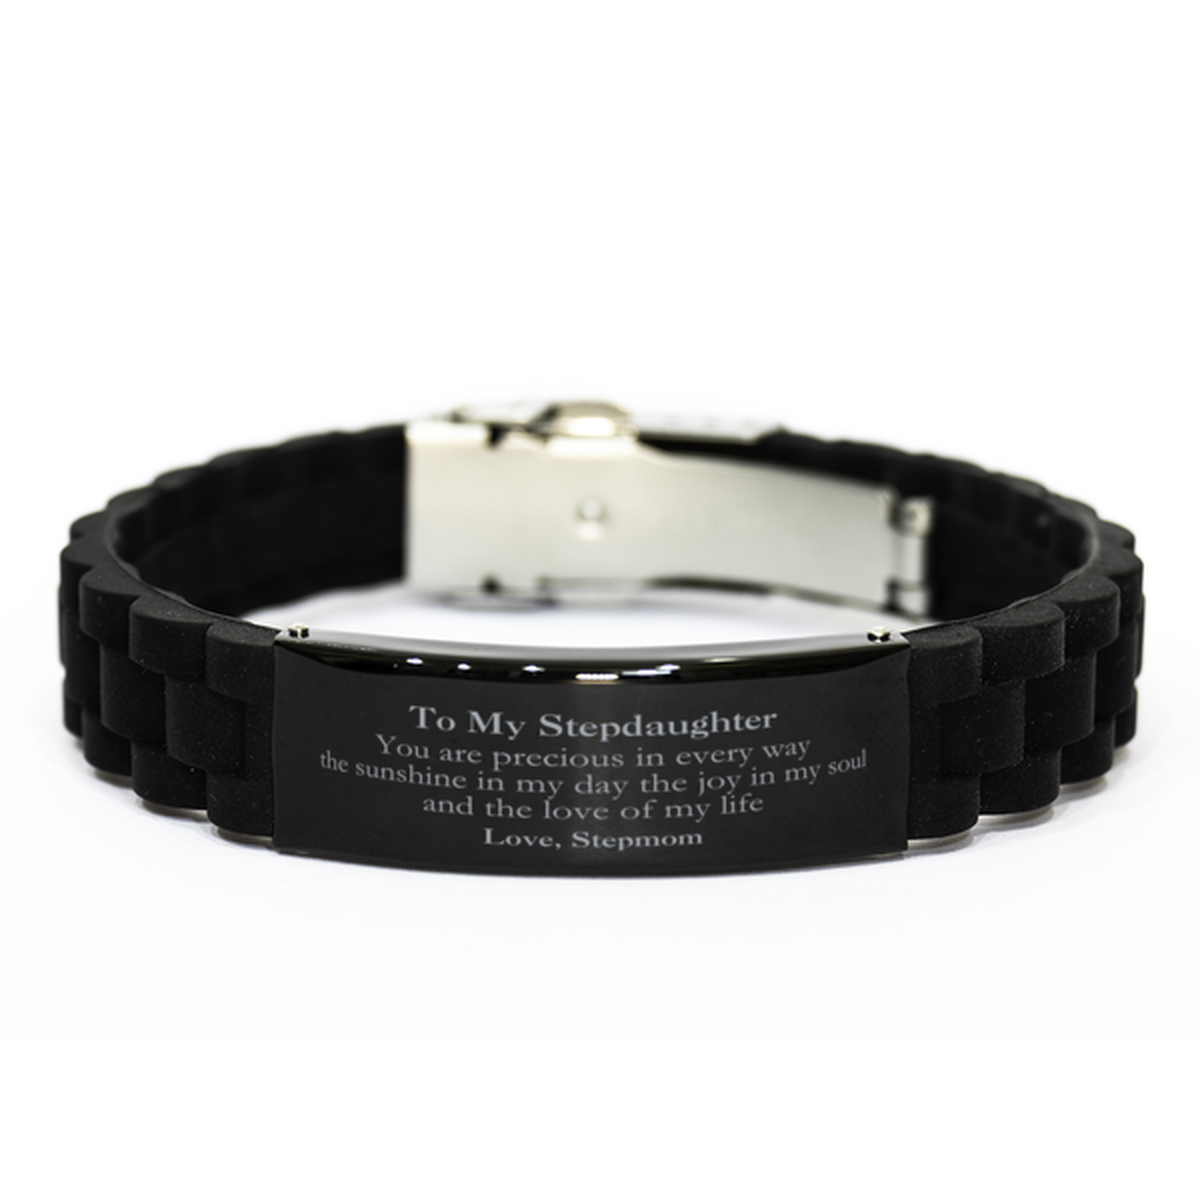 Graduation Gifts for Stepdaughter Black Glidelock Clasp Bracelet Present from Stepmom, Christmas Stepdaughter Birthday Gifts Stepdaughter You are precious in every way the sunshine in my day. Love, Stepmom